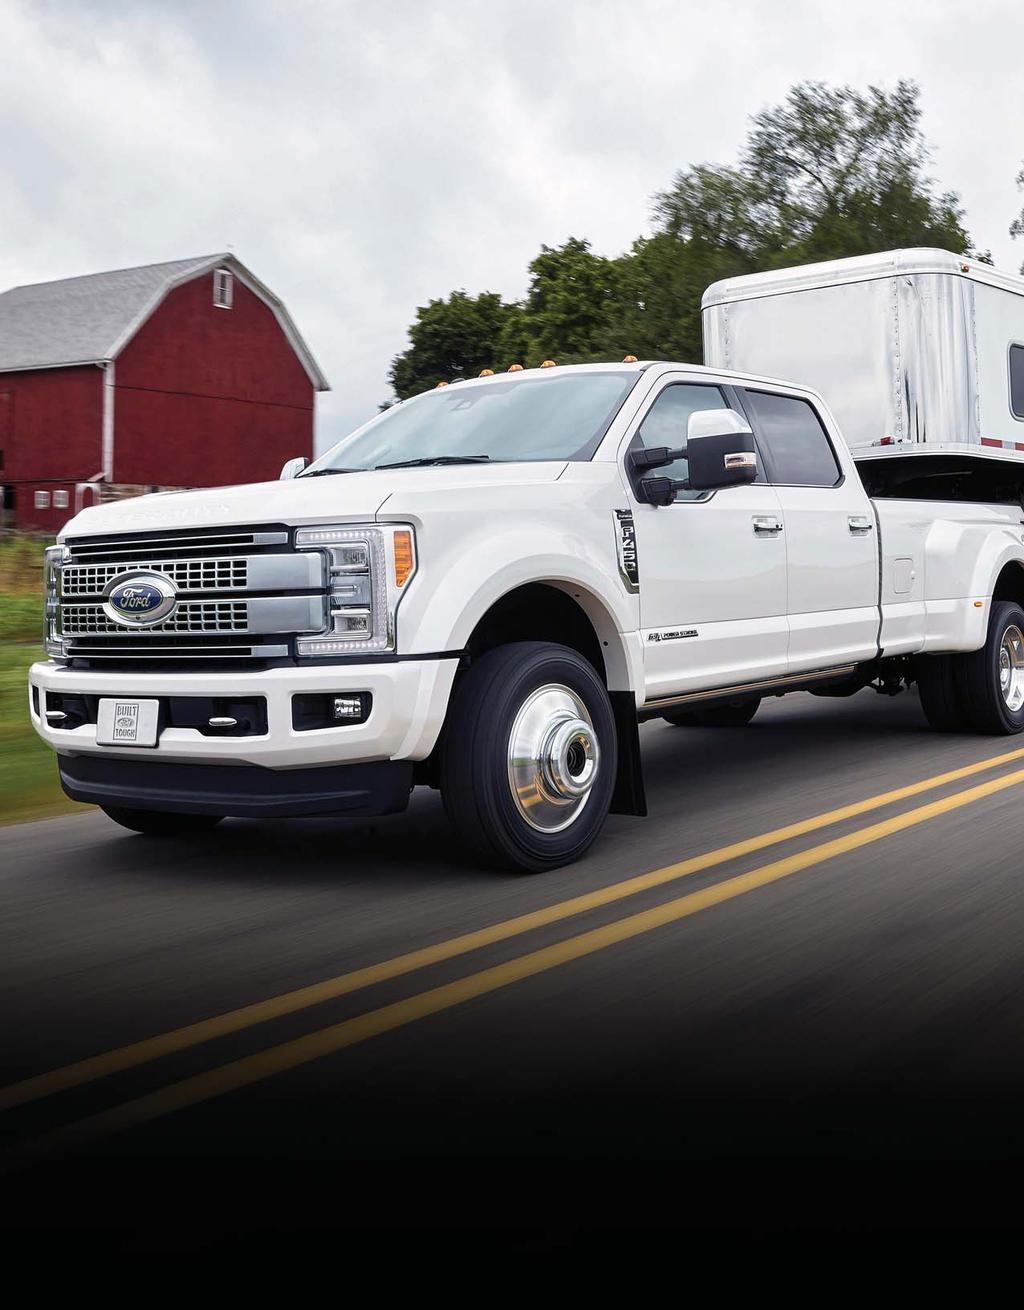 4 2017 RV & TRAILER SUPER DUTY PICKUPS A NEW LEVEL OF HORSEPOWER 440 hp @ 2,800 rpm (1) TORQUE 925 lb.-ft. @ 1,800 rpm (1) CONVENTIONAL TOWING up to 21,000 lbs. (2) 5TH-WHEEL TOWING up to 27,500 lbs.